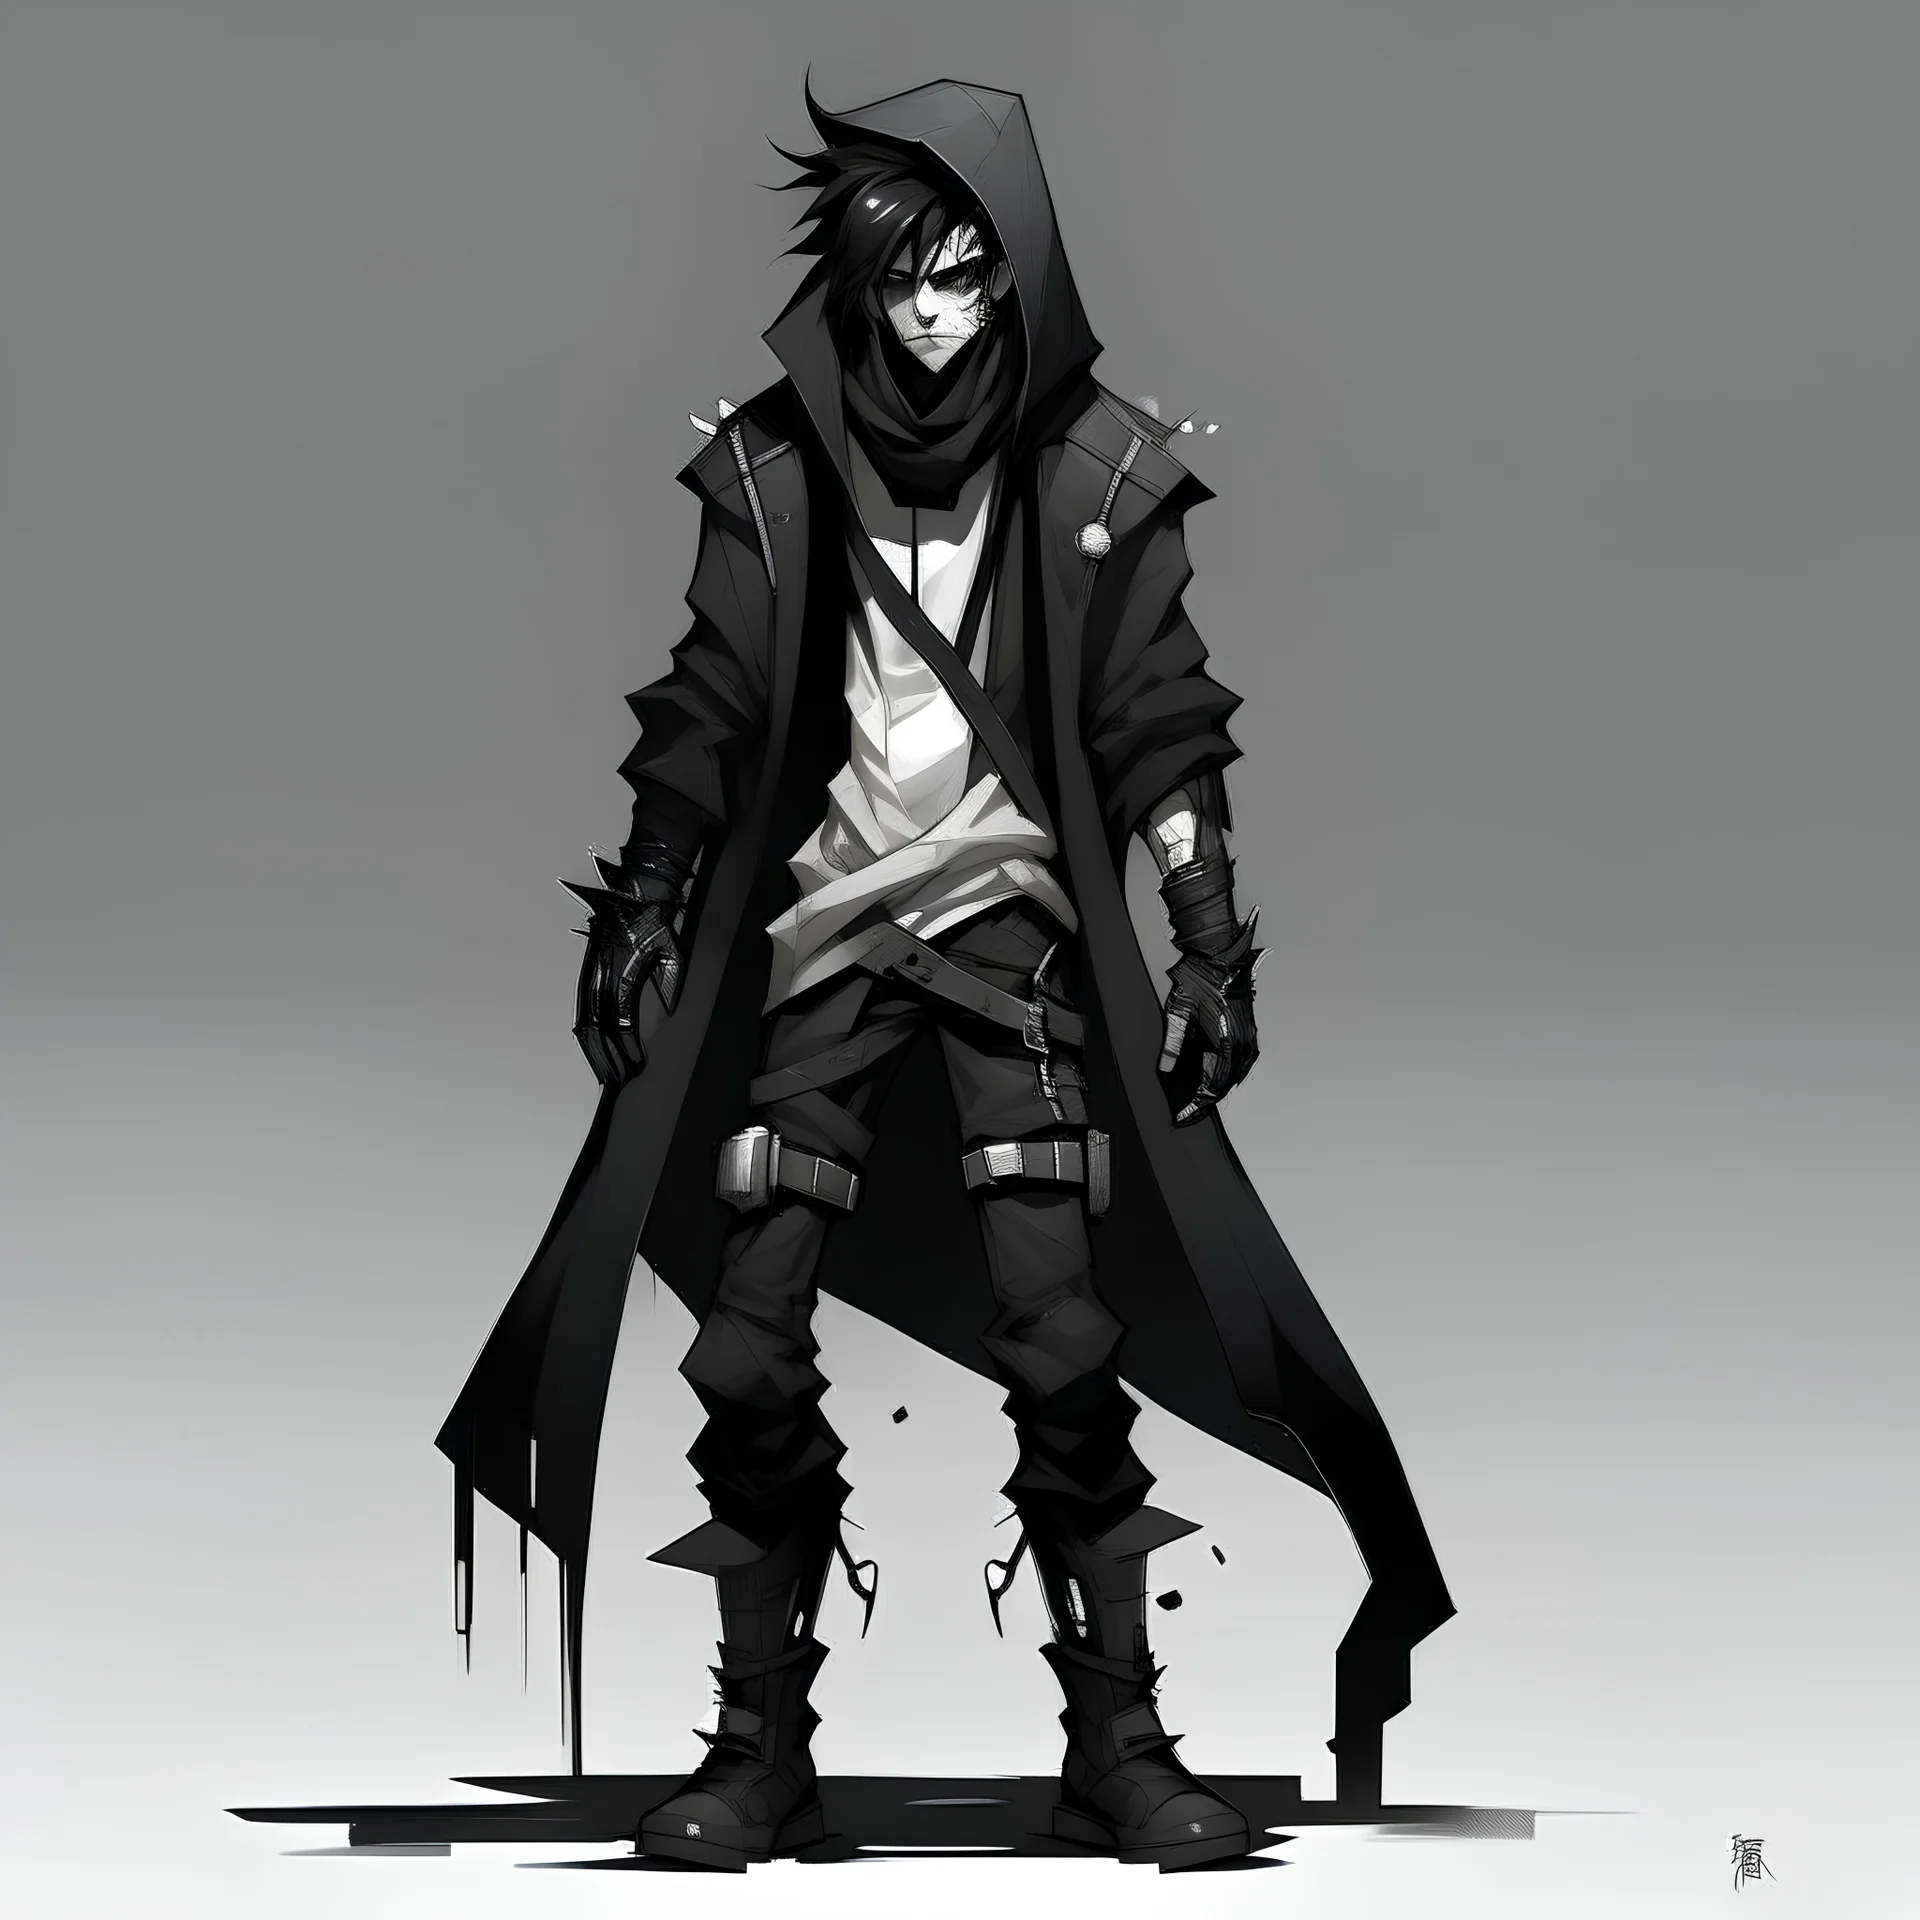 Animated person with Literally white skin, short and messy hair that is black with white streaks through it, wears spiked bracelet, a black hooded cloak/jacket made of leather and metal, black boots, and black cargo pants with silver buttons